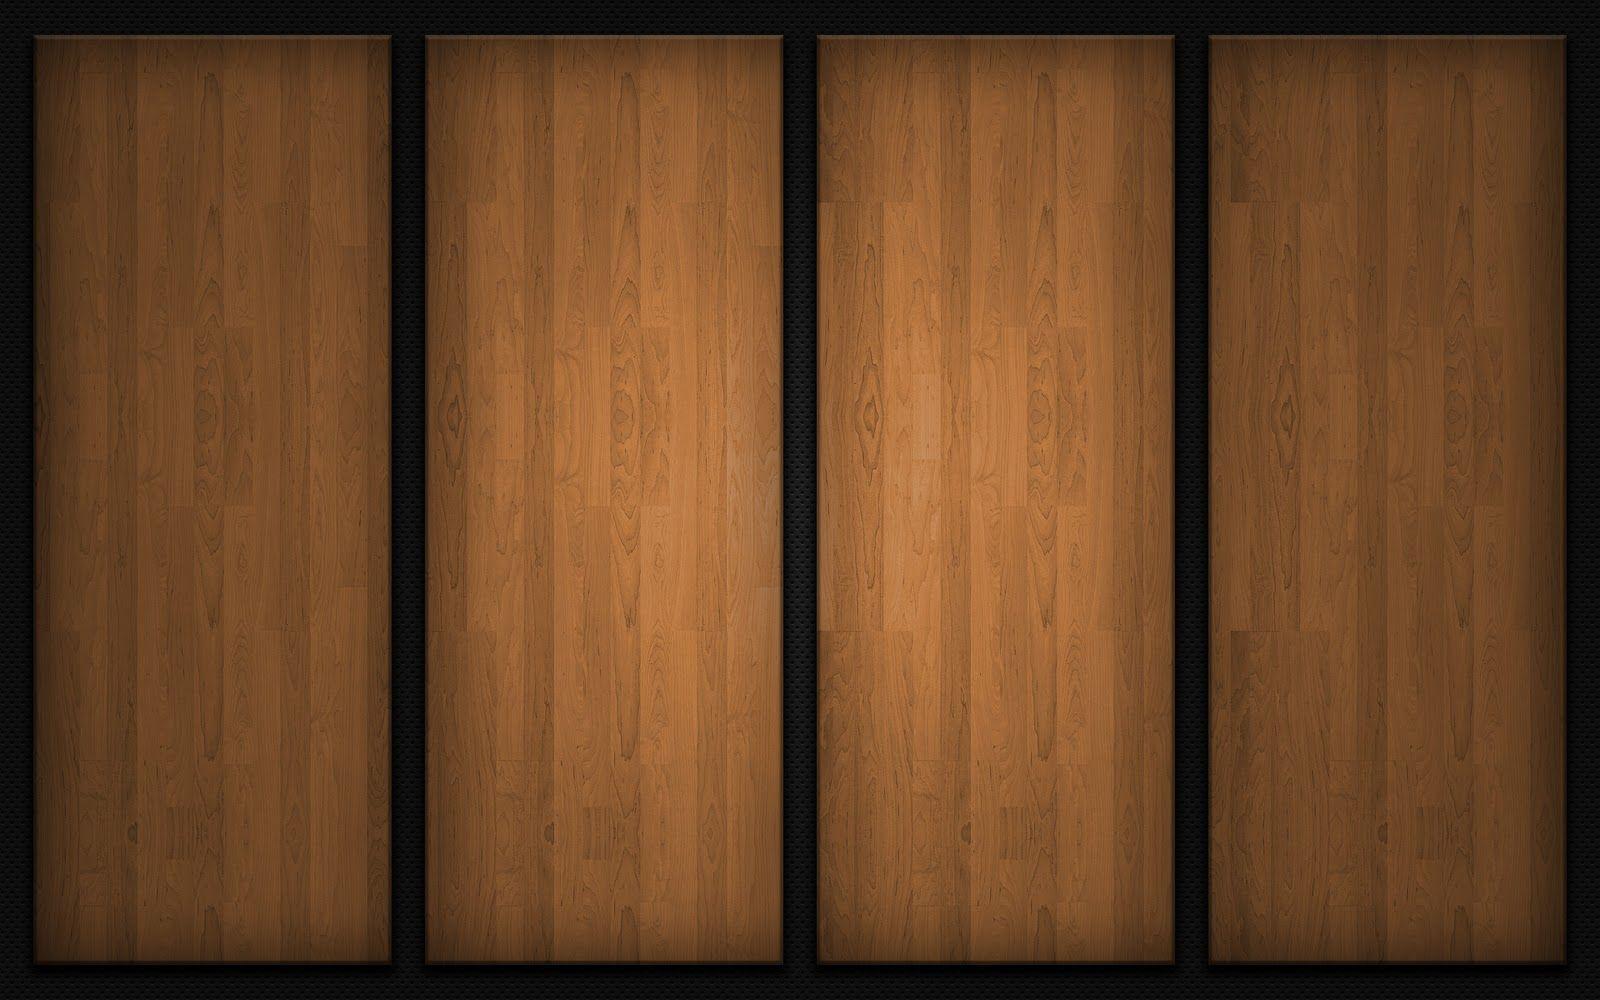 Hd Wallpaper Wood Dhoomwallpaper.com. Latest HD Wallpaper Collection